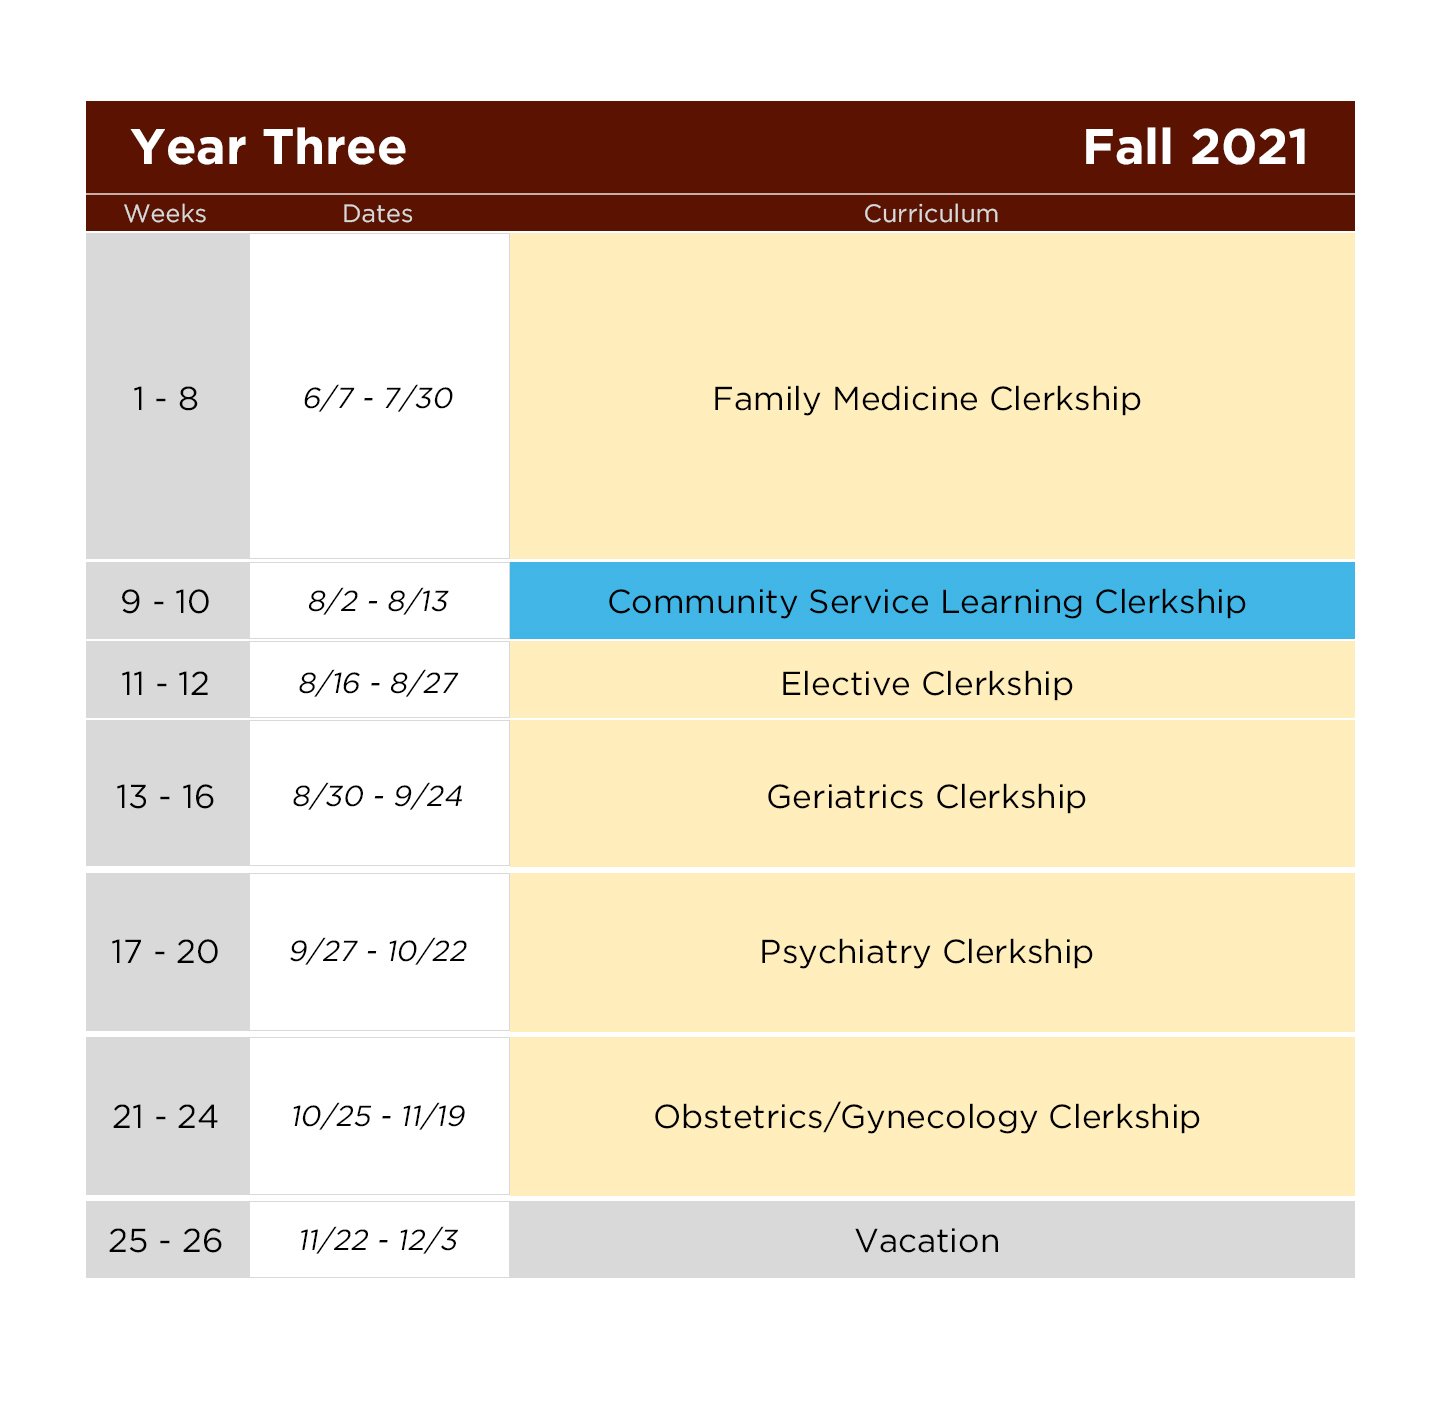 A sample of the schedule for Fall 2021 Year Three Clerkship